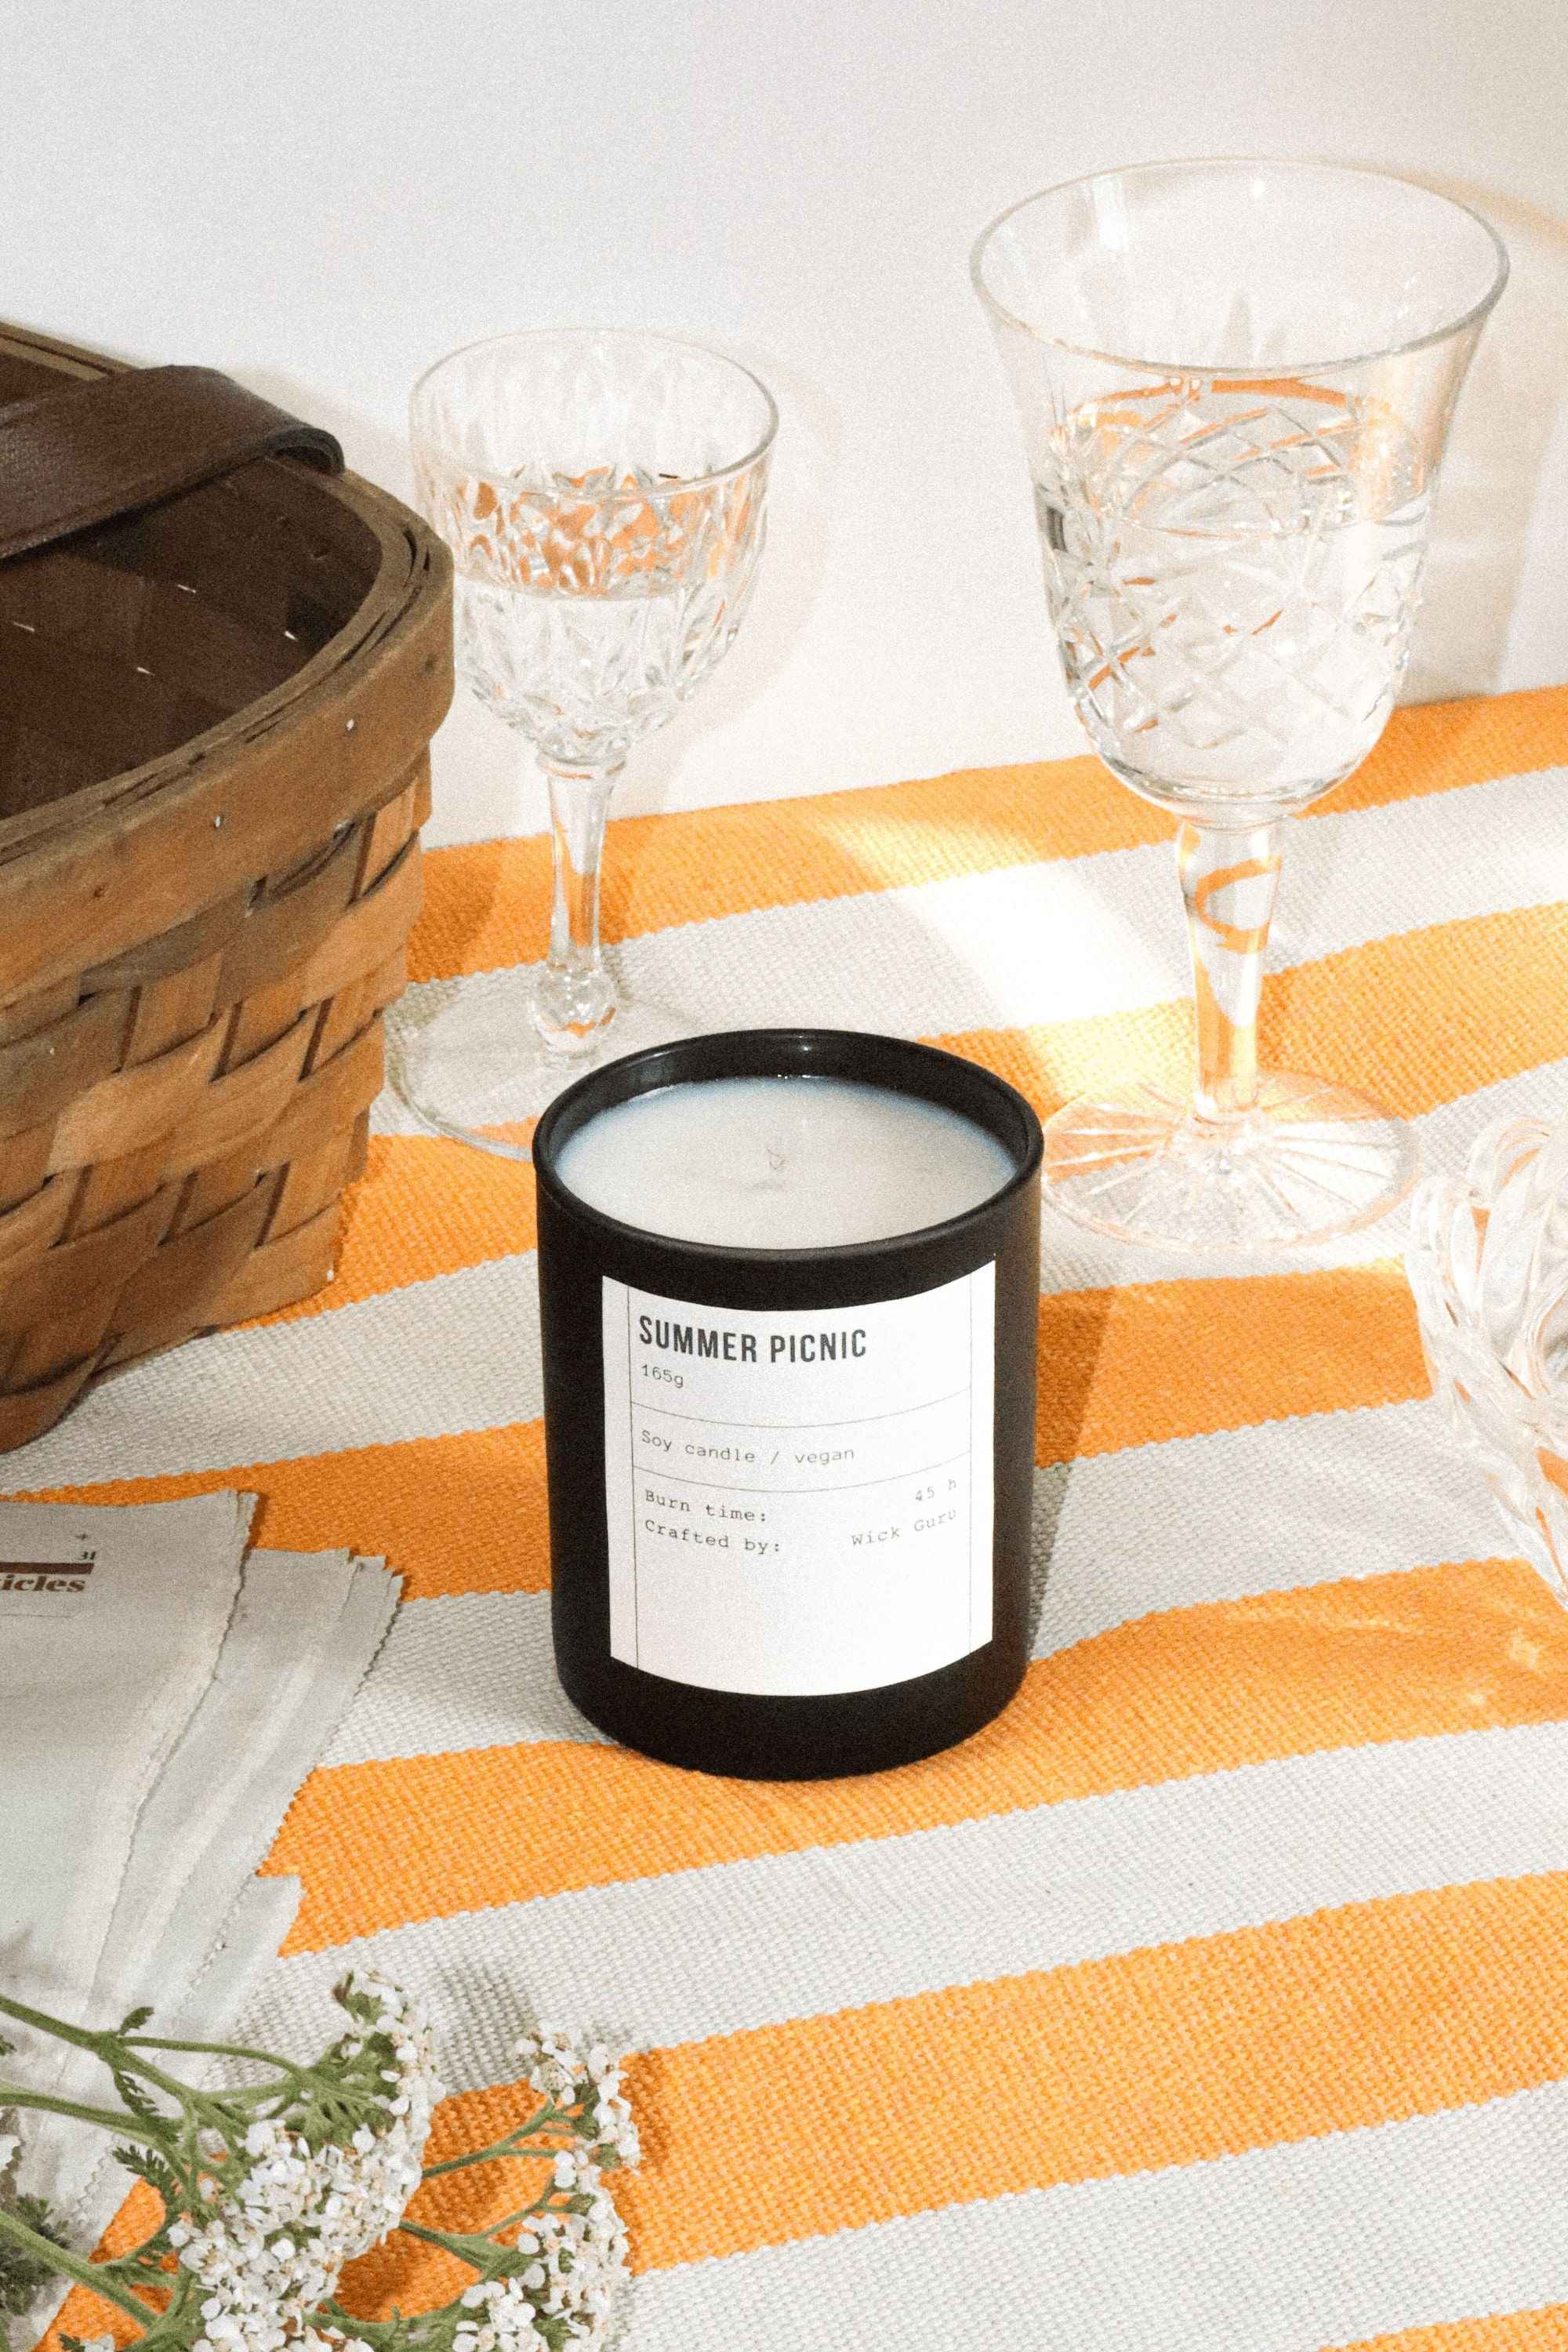 Summer Picnic Candle - Enjoy the outdoors with our soy candle set amidst a charming picnic scene.